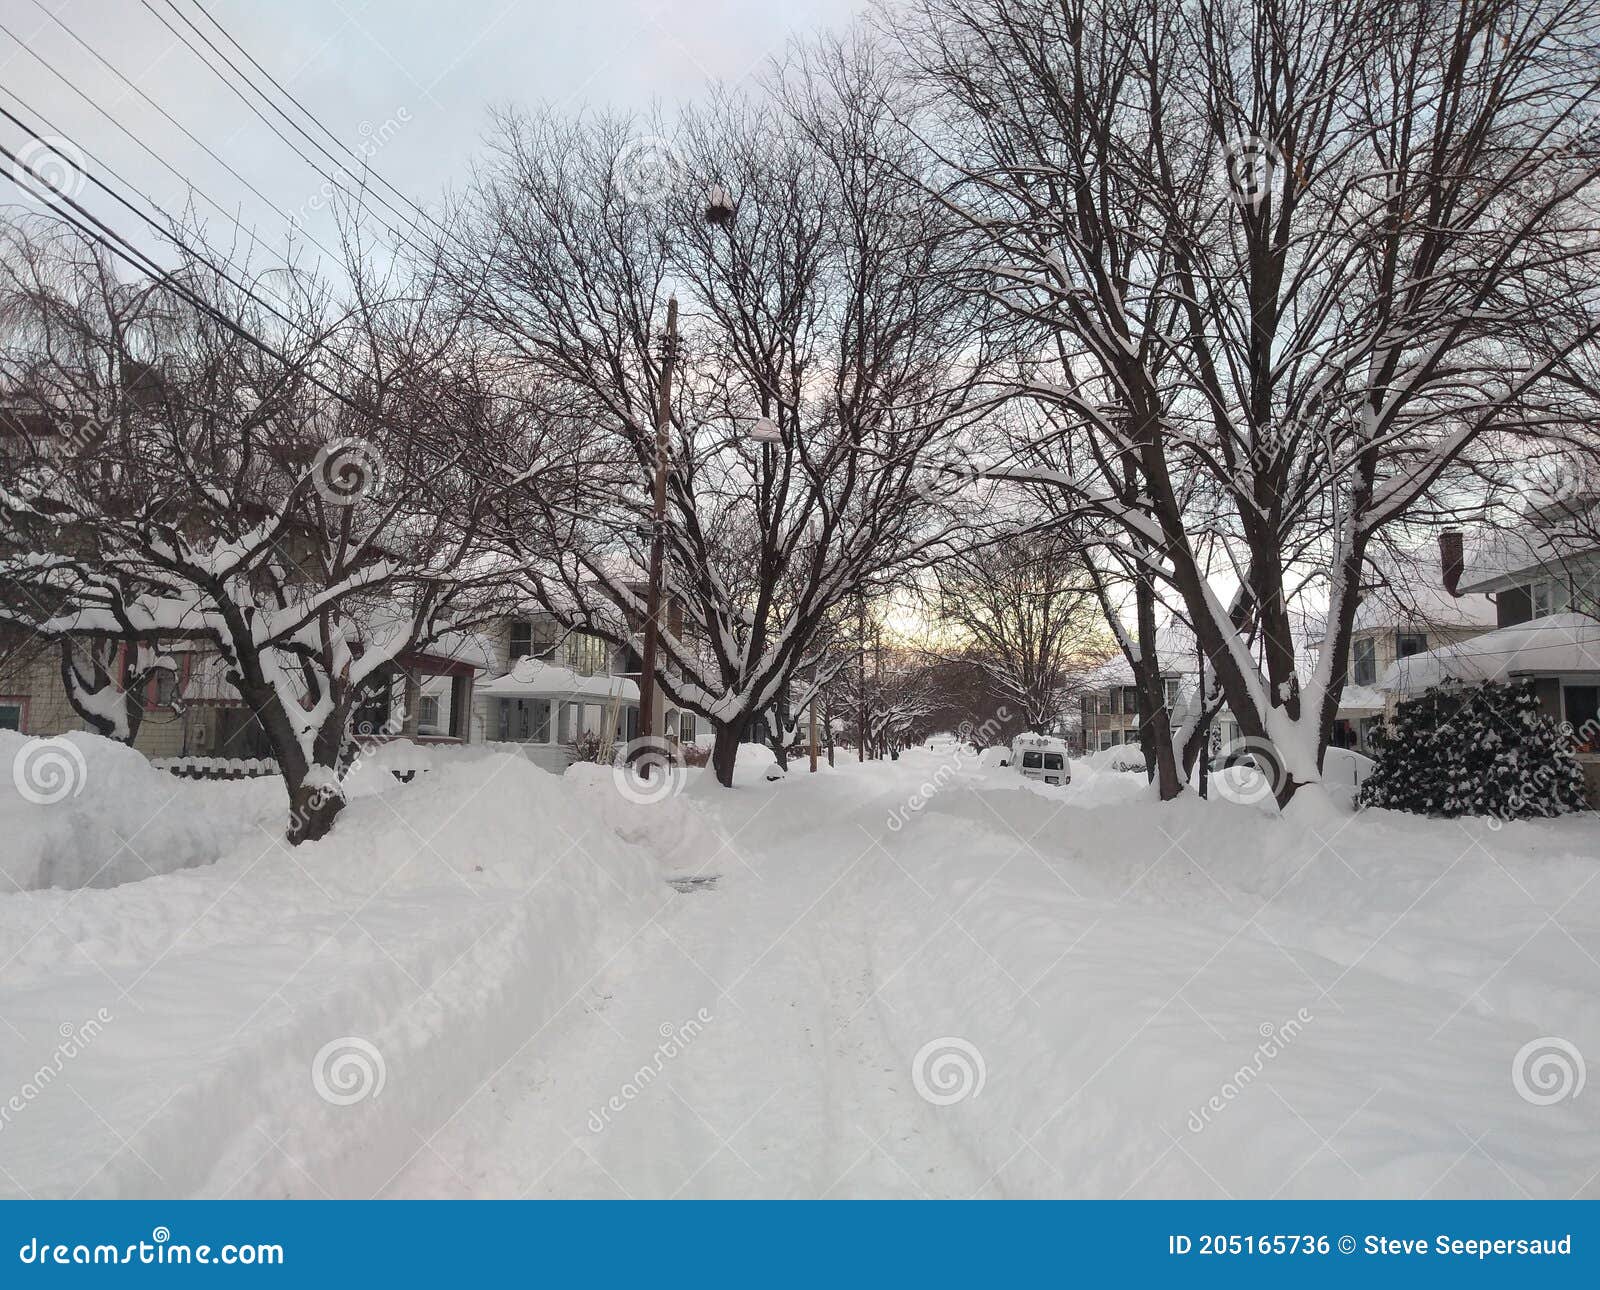 Upstate New York snowstorm. BINGHAMTON, N.Y., DEC. 17, 2020 - A residential street in the upstate New York city of Binghamton is covered by more than three feet of snow.